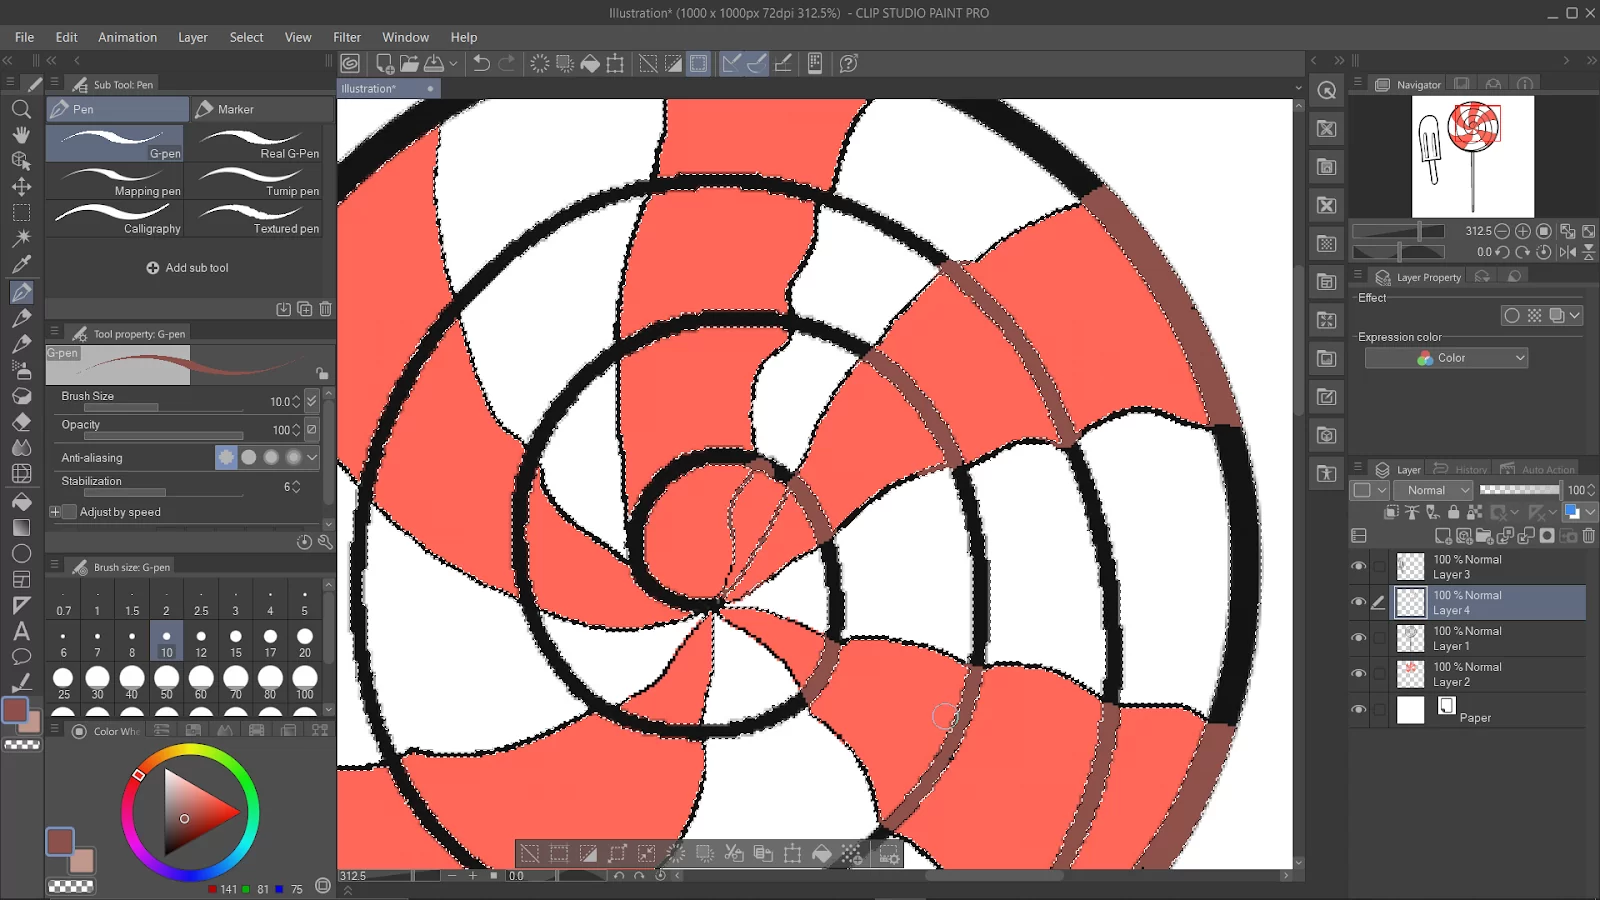 Create and Color New Layer in Clip Studio Paint